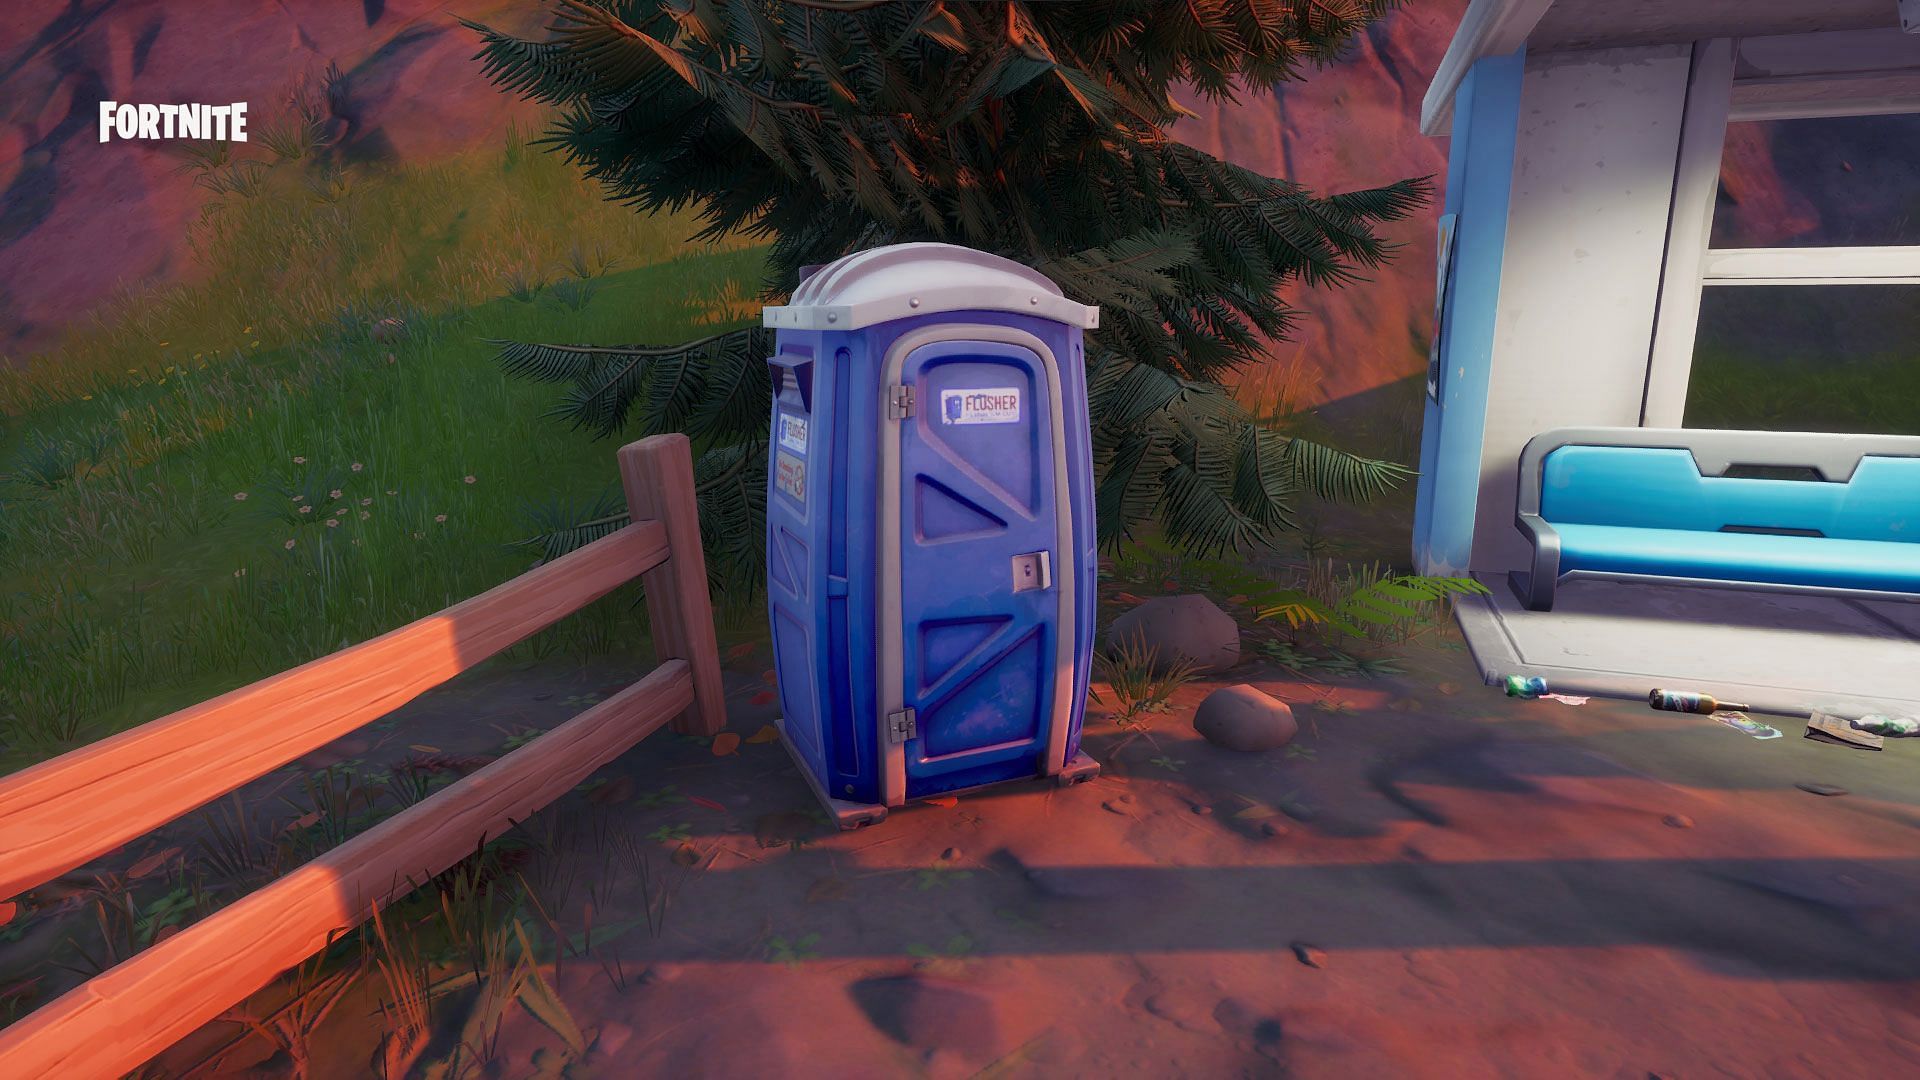 Fortnite has rather unique places to hide in-game (Image via Epic Games/Fortnite)